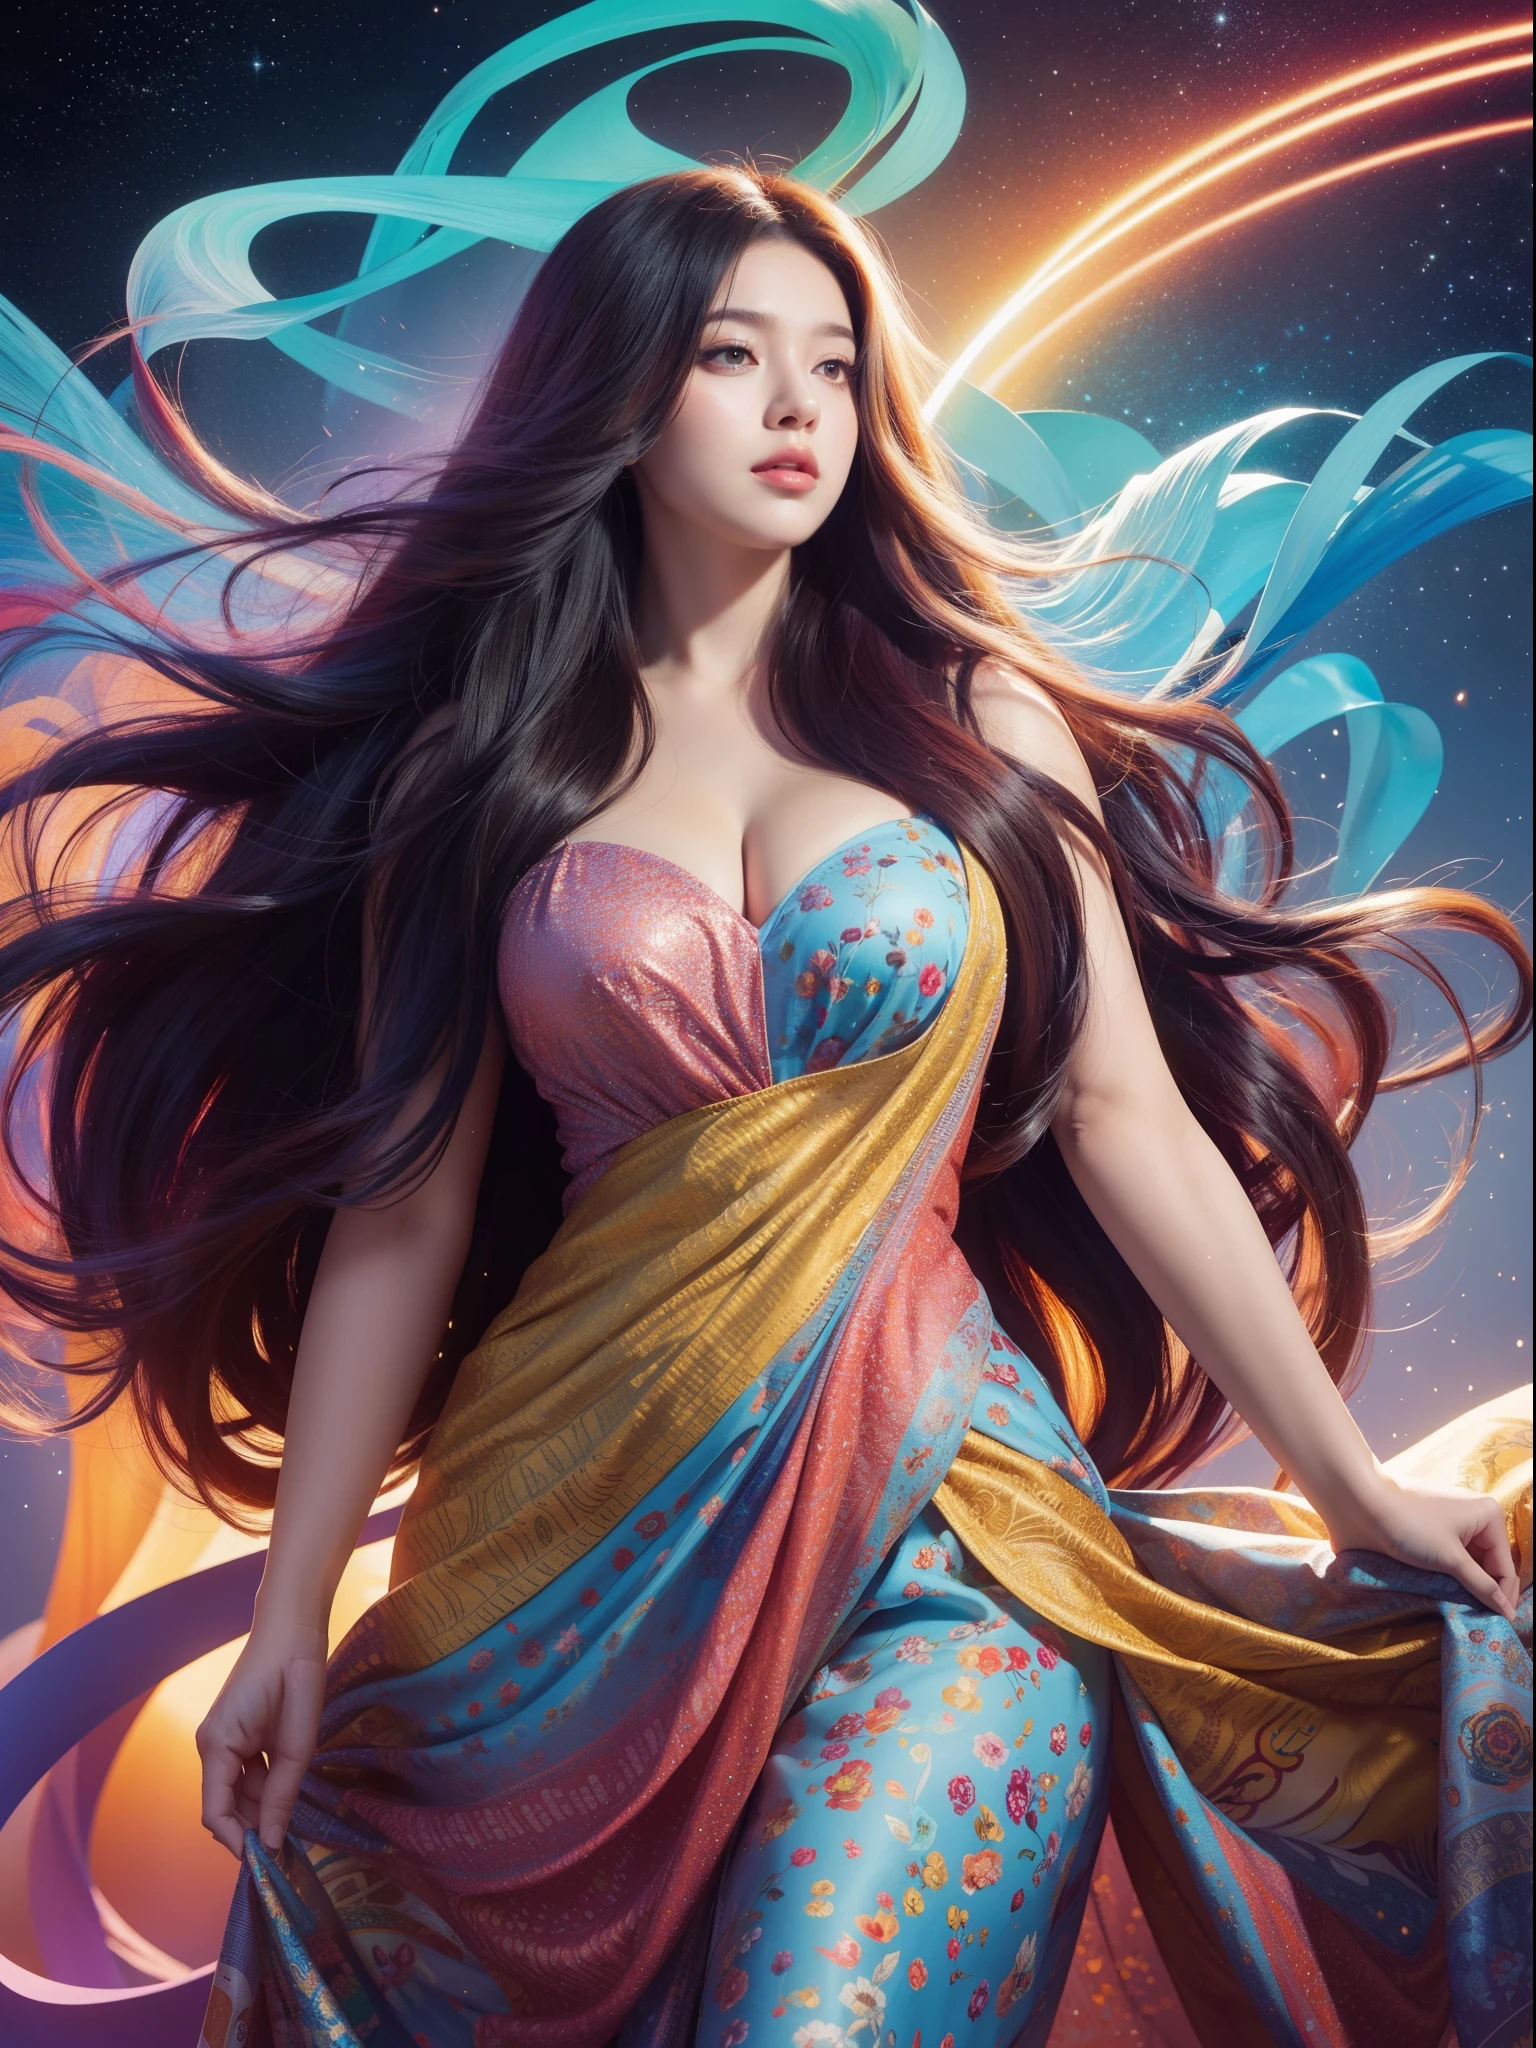 a painting of a woman with long hair and colorful hair, beautiful digital illustration, stunning digital illustration, gorgeous digital art, a beautiful artwork illustration, beautiful digital artwork, beautiful digital art, exquisite digital illustration, intricate digital painting, very beautiful digital art, vibrant digital painting, beautiful gorgeous digital art, psychedelic flowing hair, colorful digital painting, inspiring digital art, stylized digital art